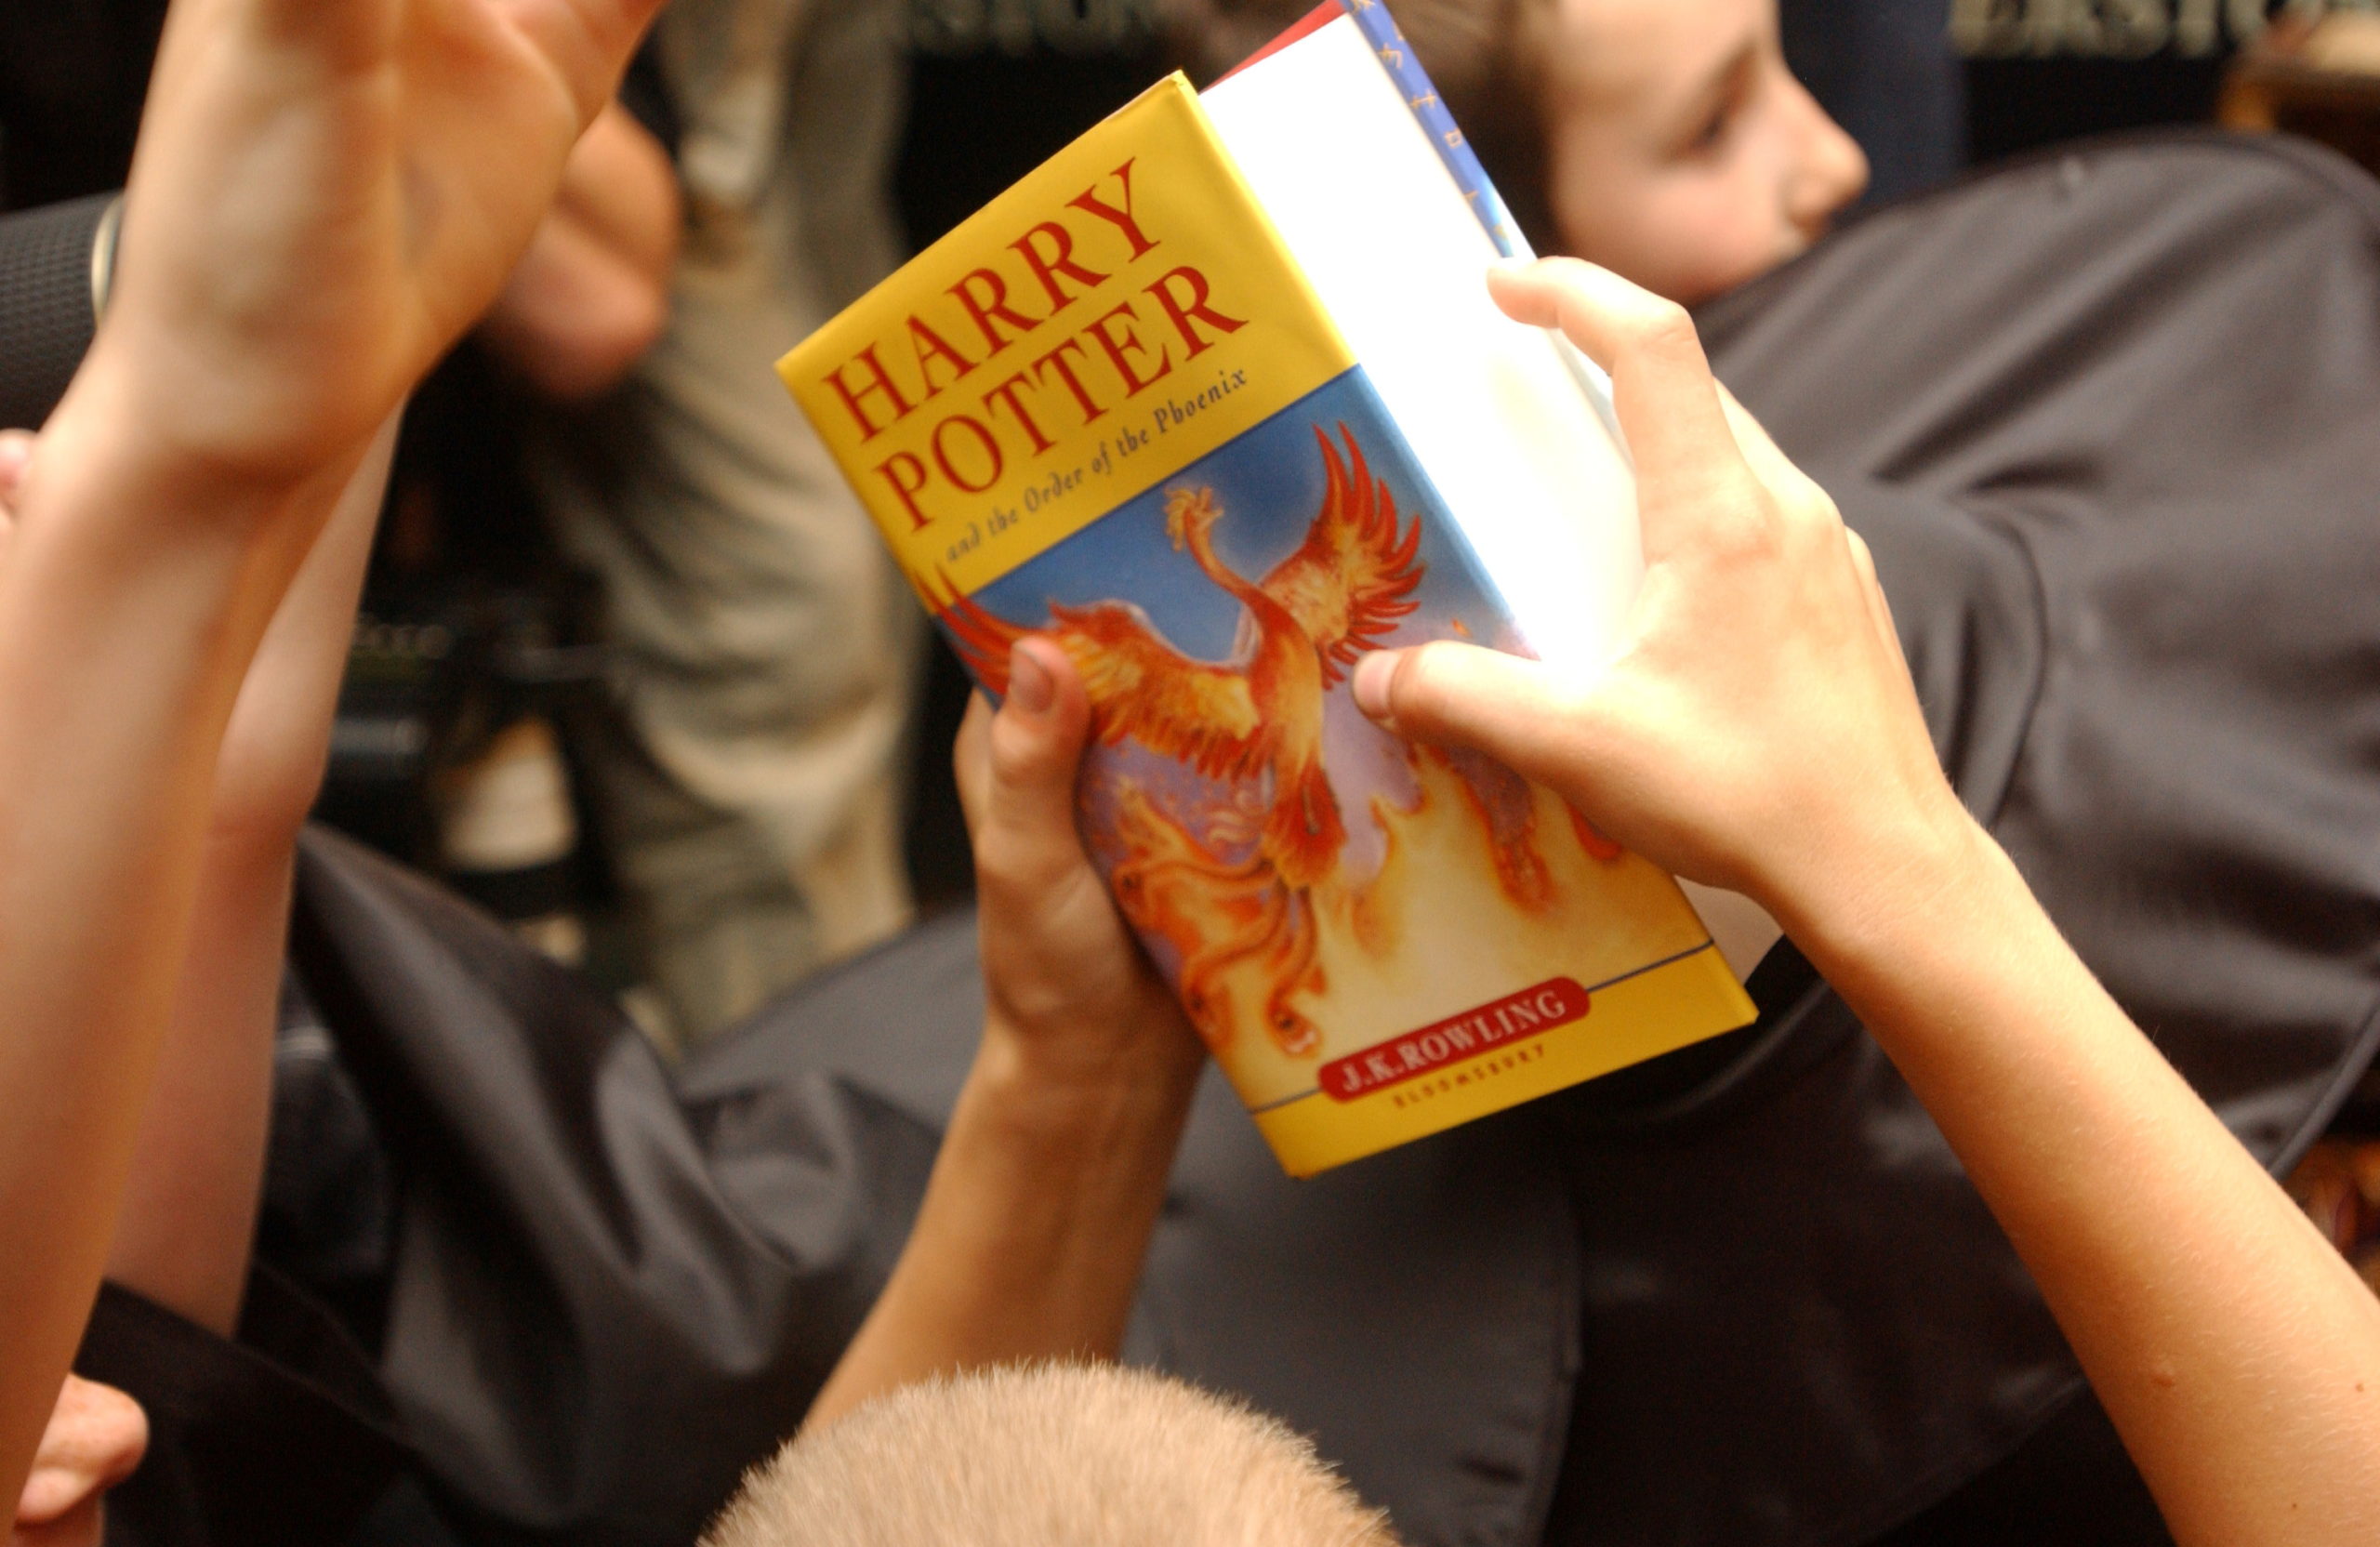 A child holds a copy of "Harry Potter and the Order of the Phoenix," at Waterstone's bookshop in central London 21 June, 2003 REUTERS/Sinead Lynch/File Photo